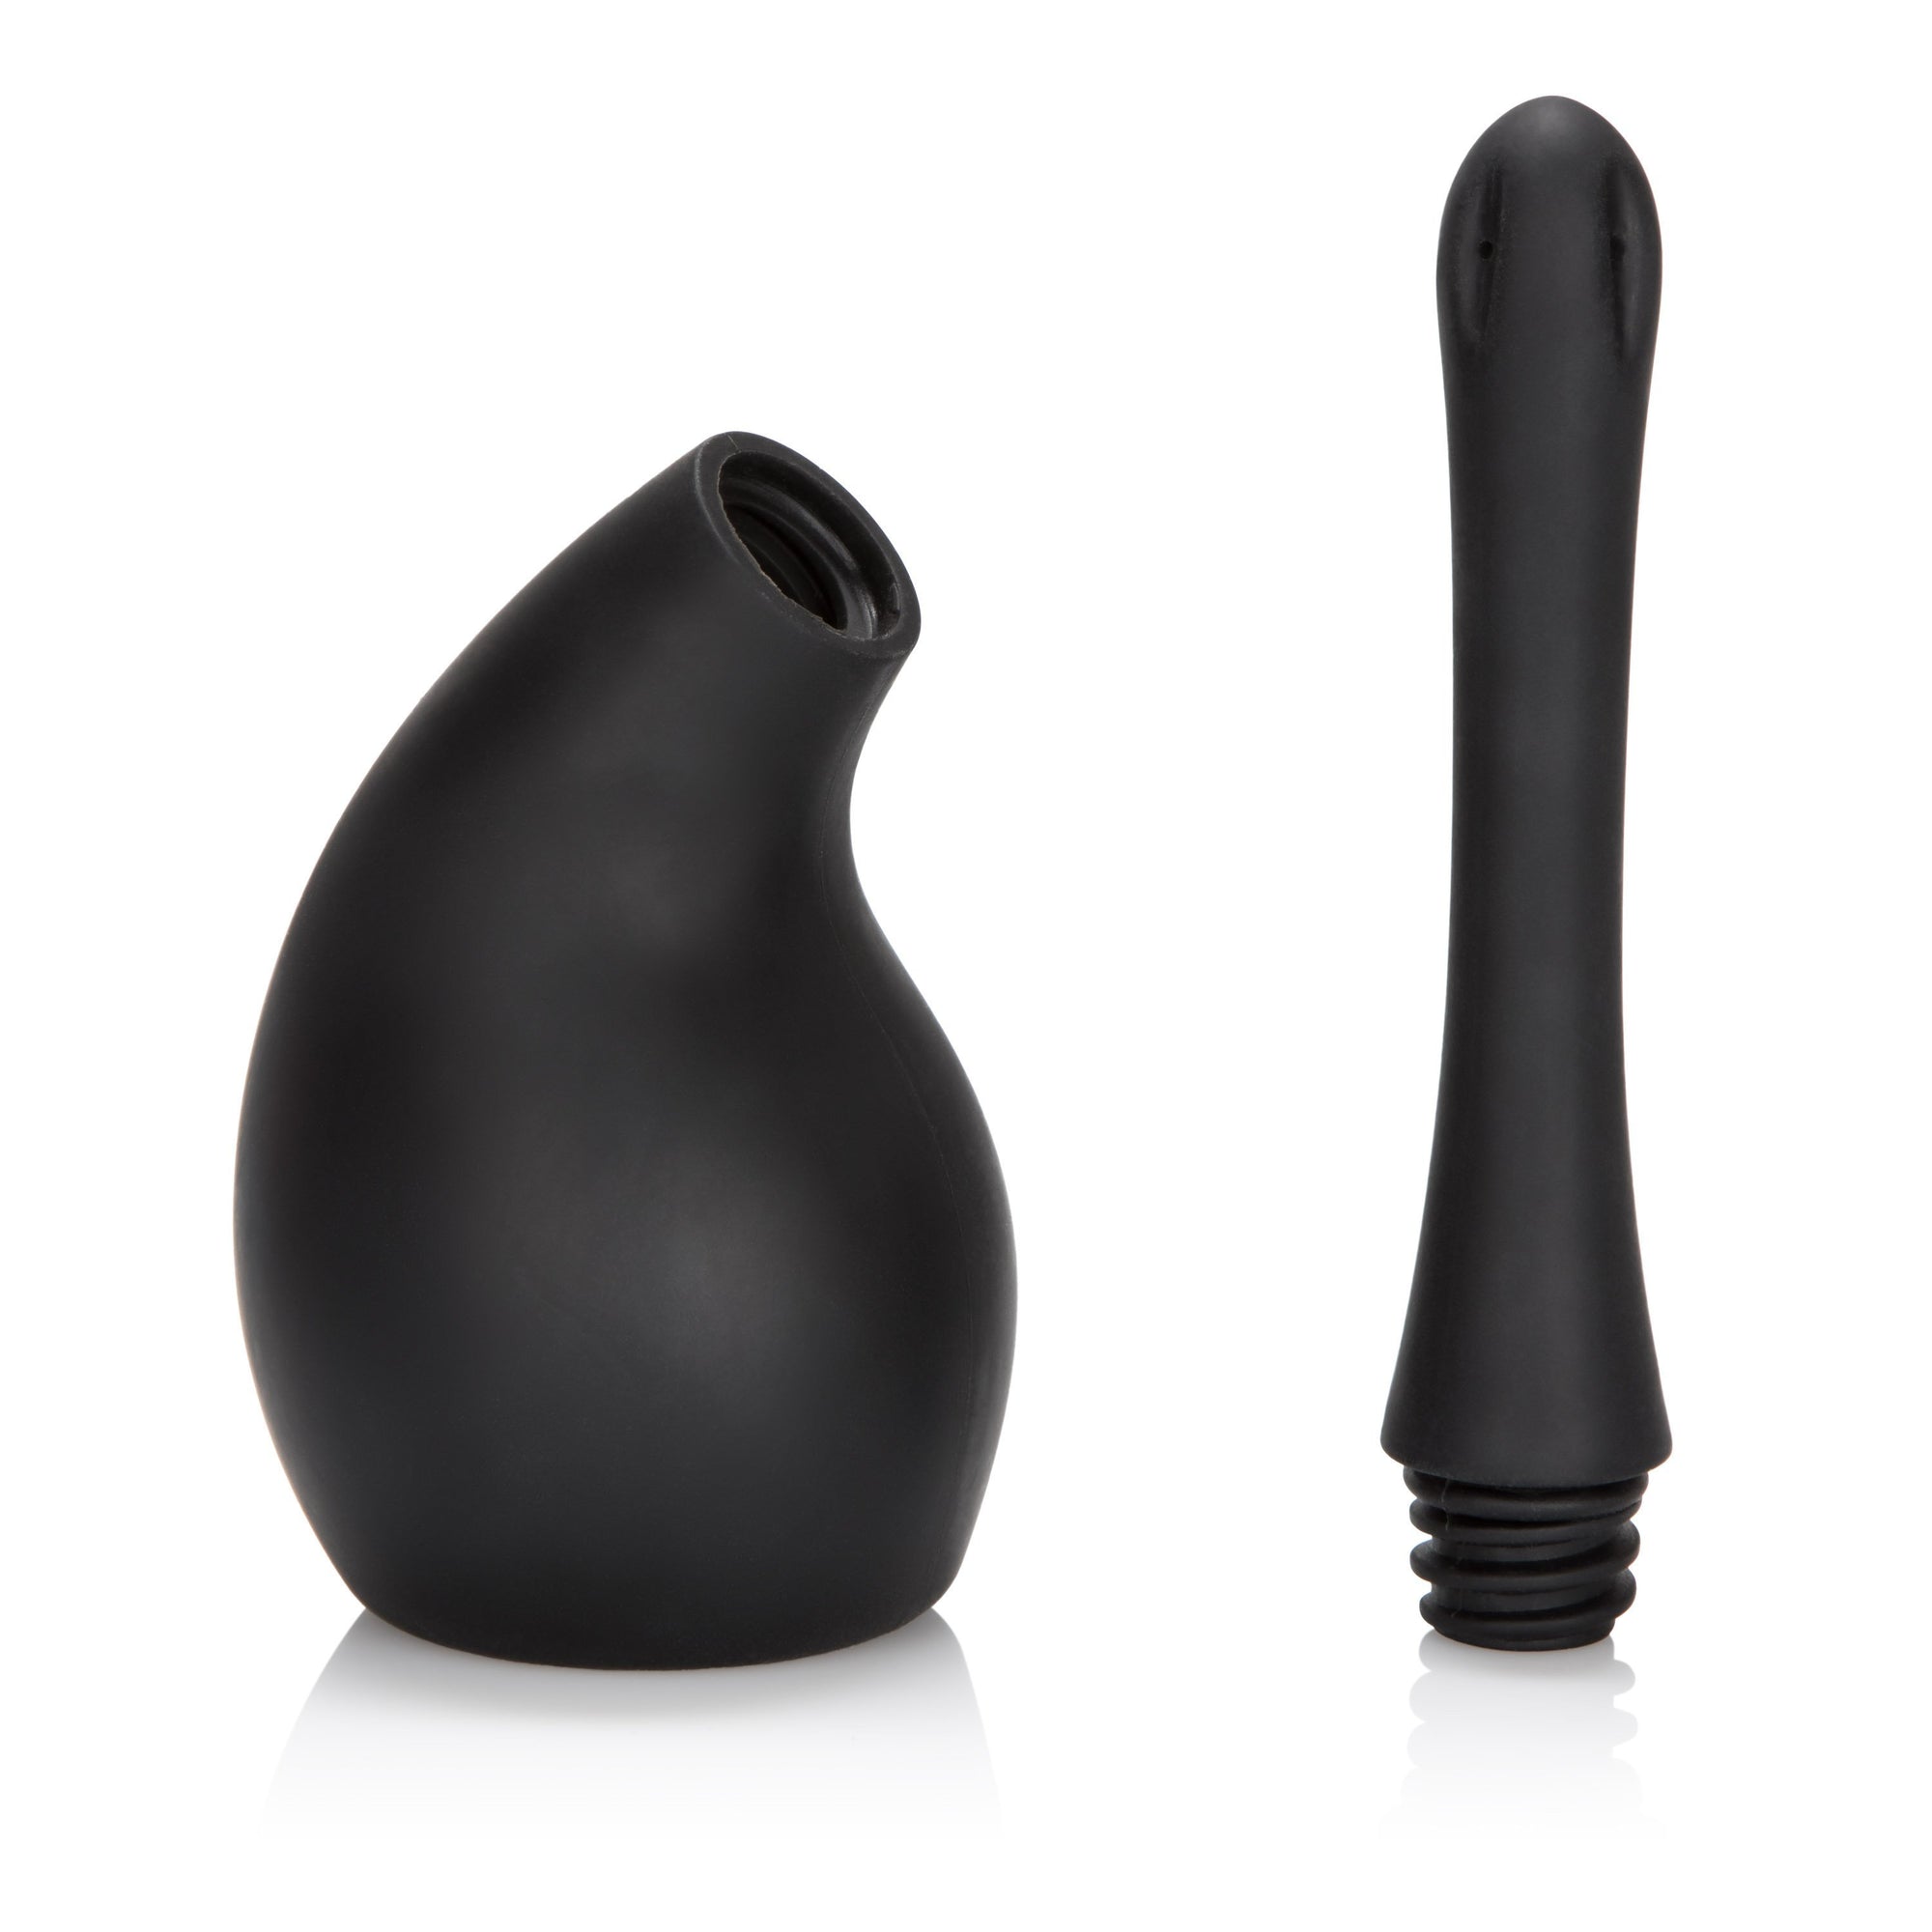 California Exotics - Ultimate Cleansing Douche System (Black) Anal Douche (Non Vibration) Singapore